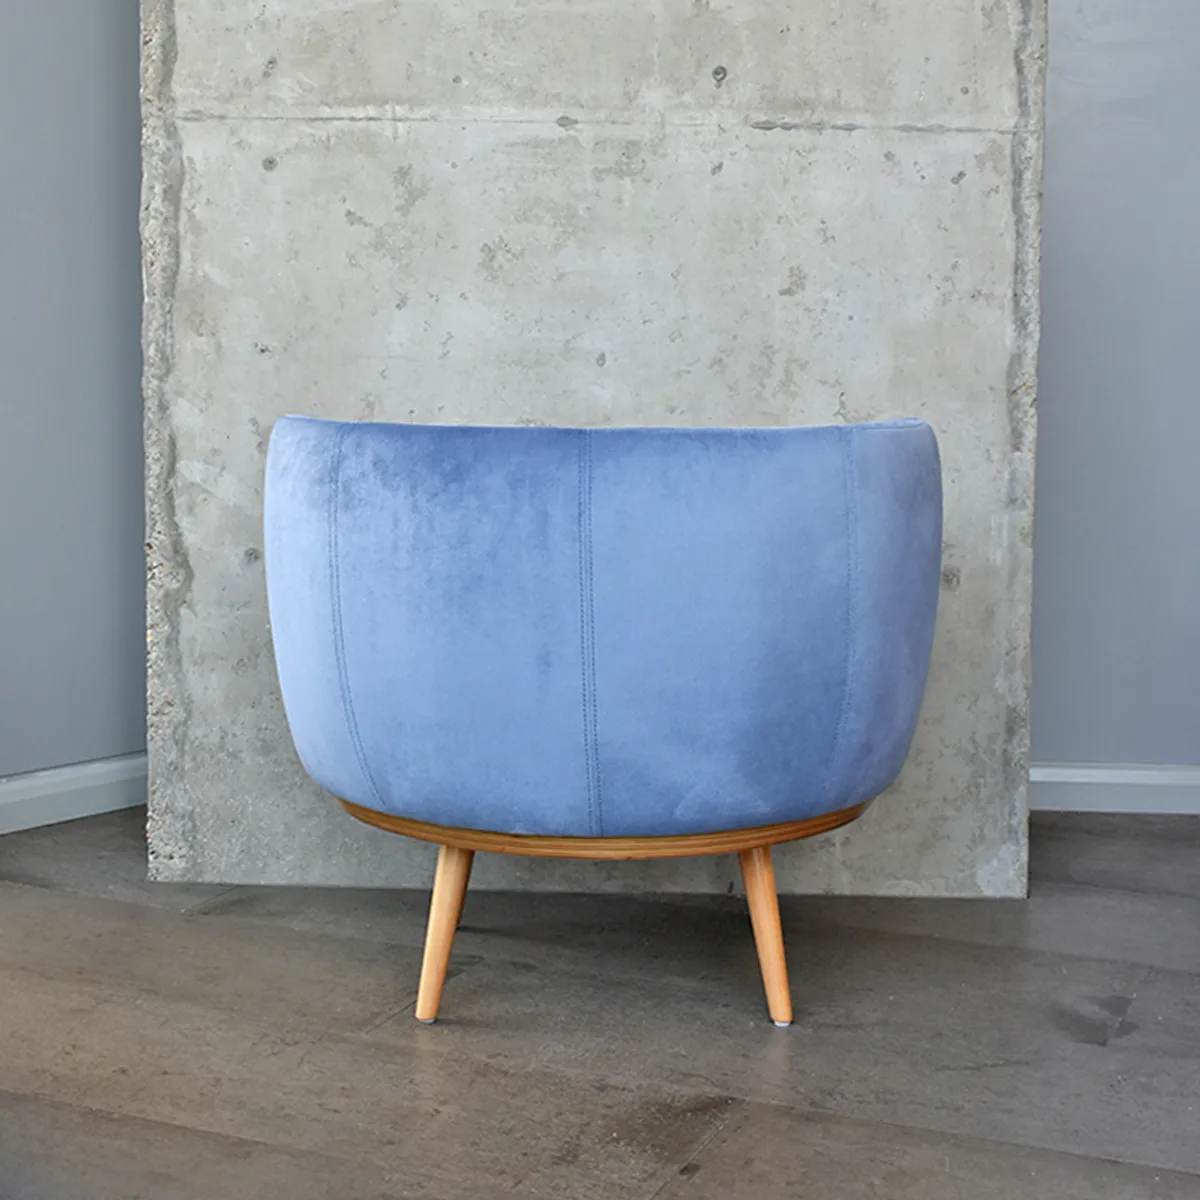 Cosmo Lounge Chair New Furniture From Milan 2019 By Inside Out Contracts 040